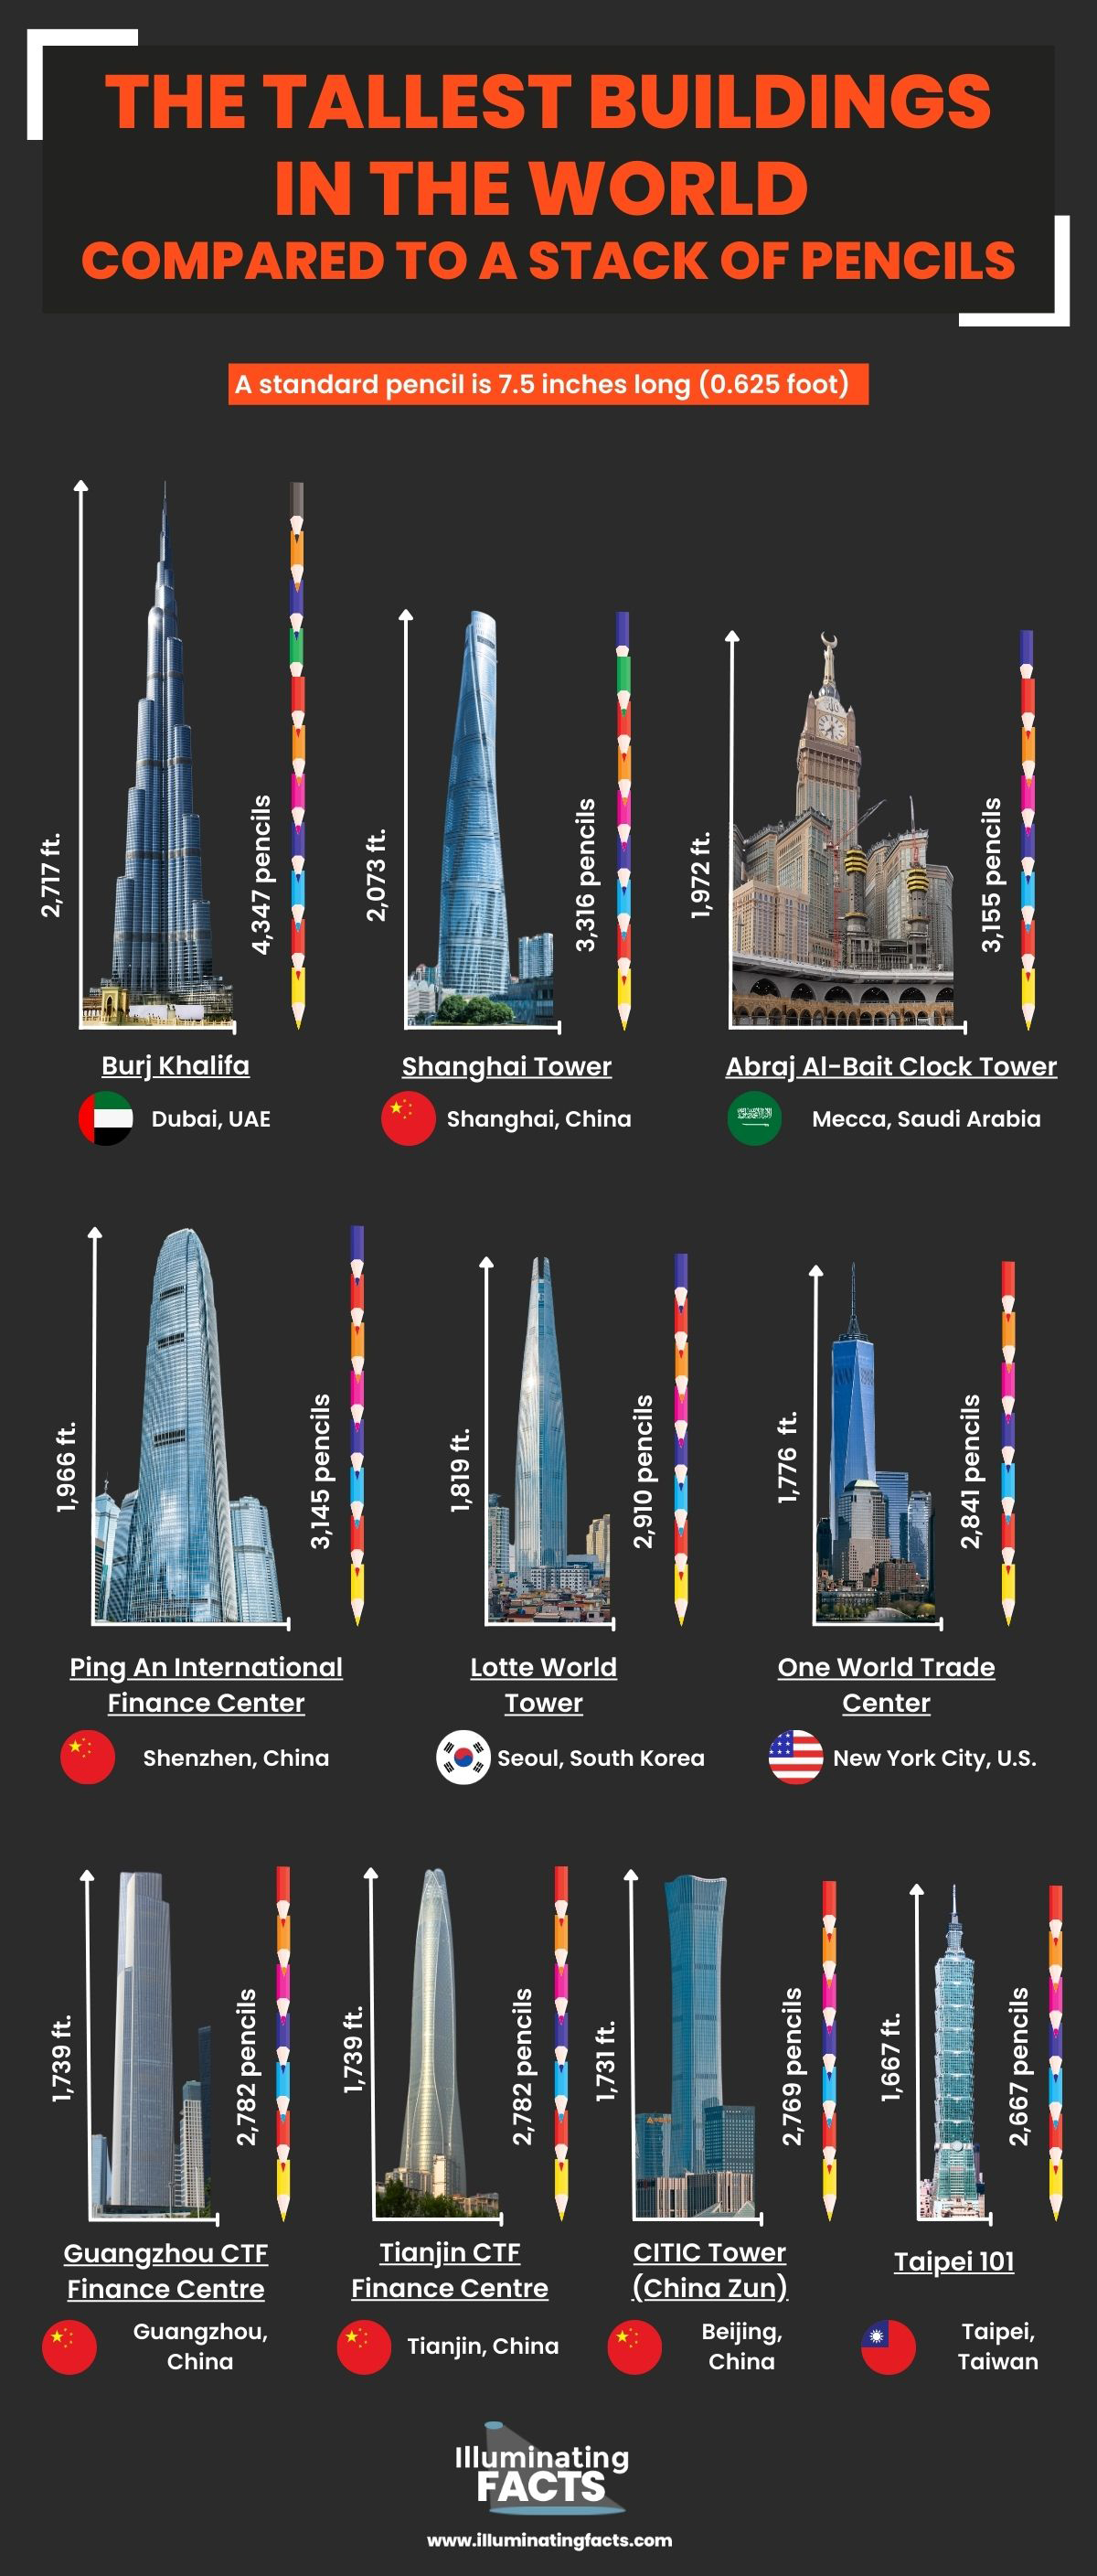 The Tallest Buildings in the World Compared to Pencils